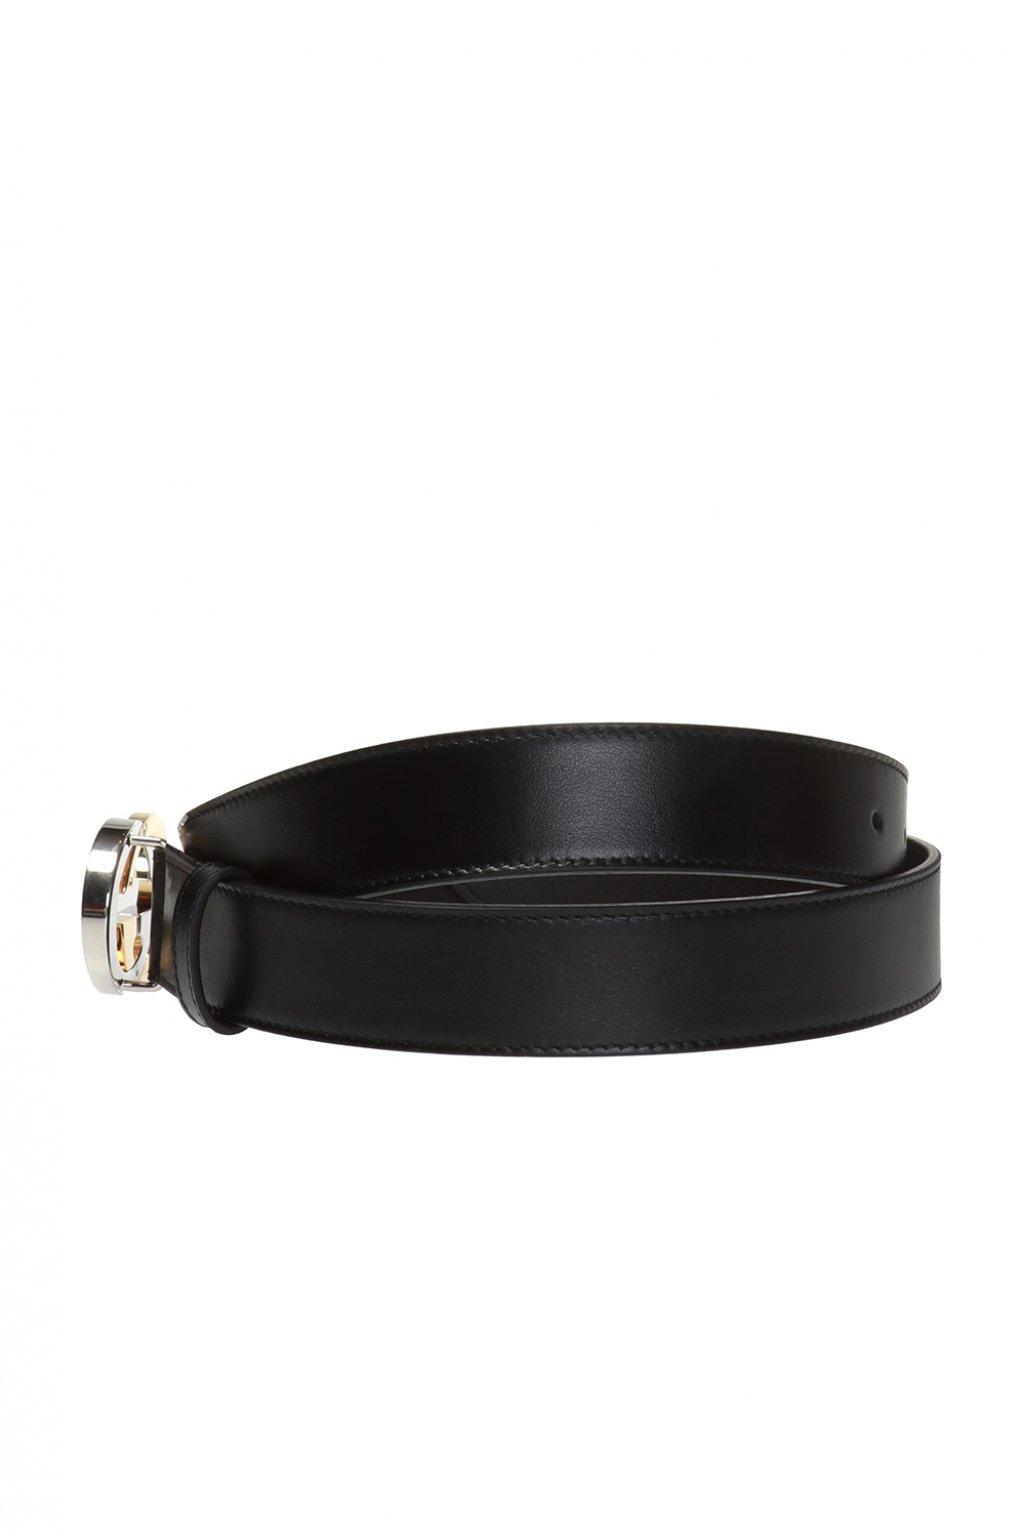 Gucci Leather Decorative Buckle Belt in Black for Men - Lyst